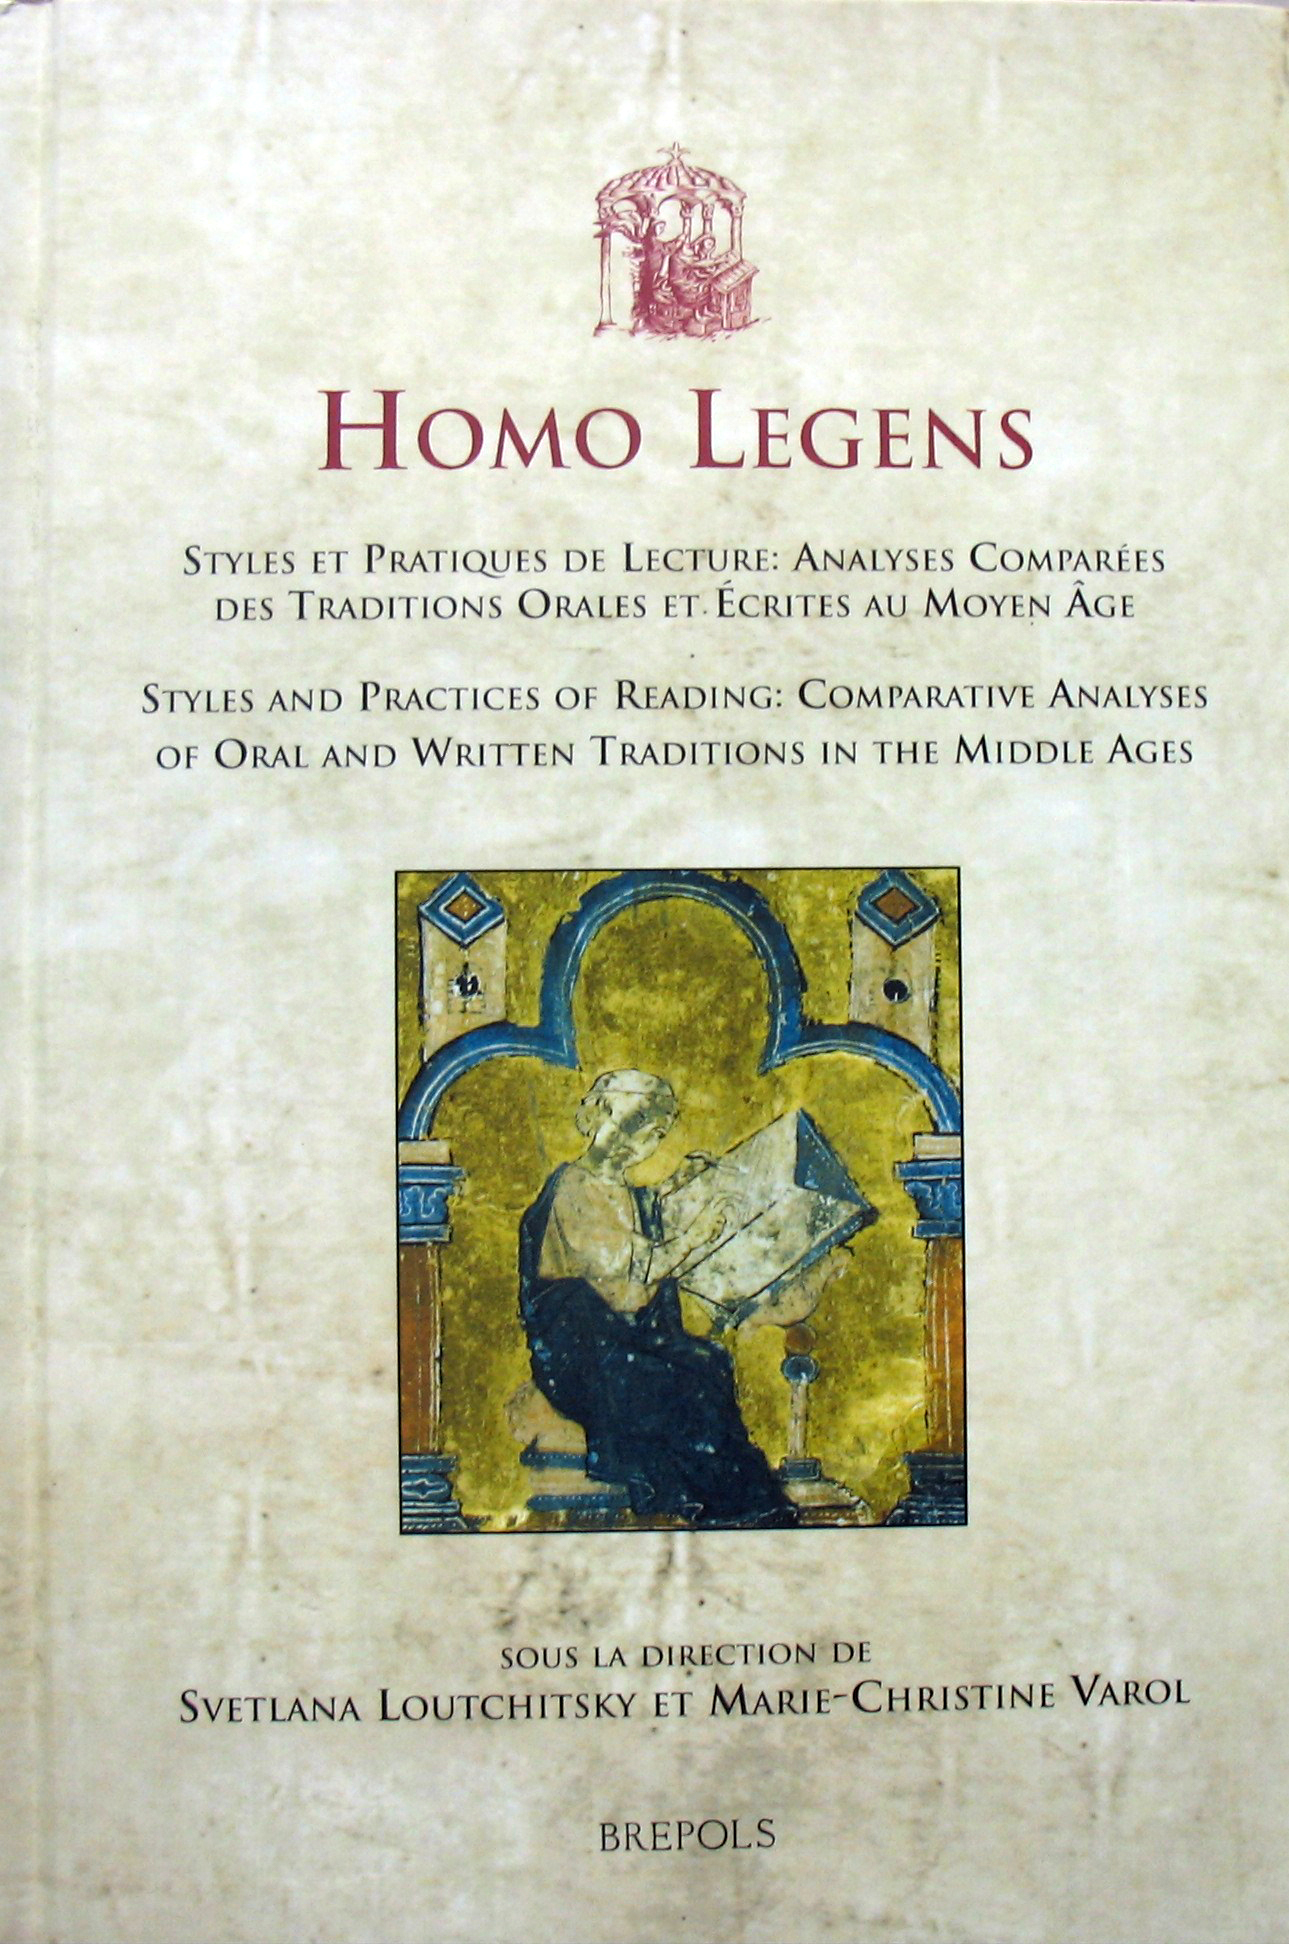 Homo legens. Styles and Practices of reading:  Comparative analysis of Oral and Written traditions  in the Middle Ages